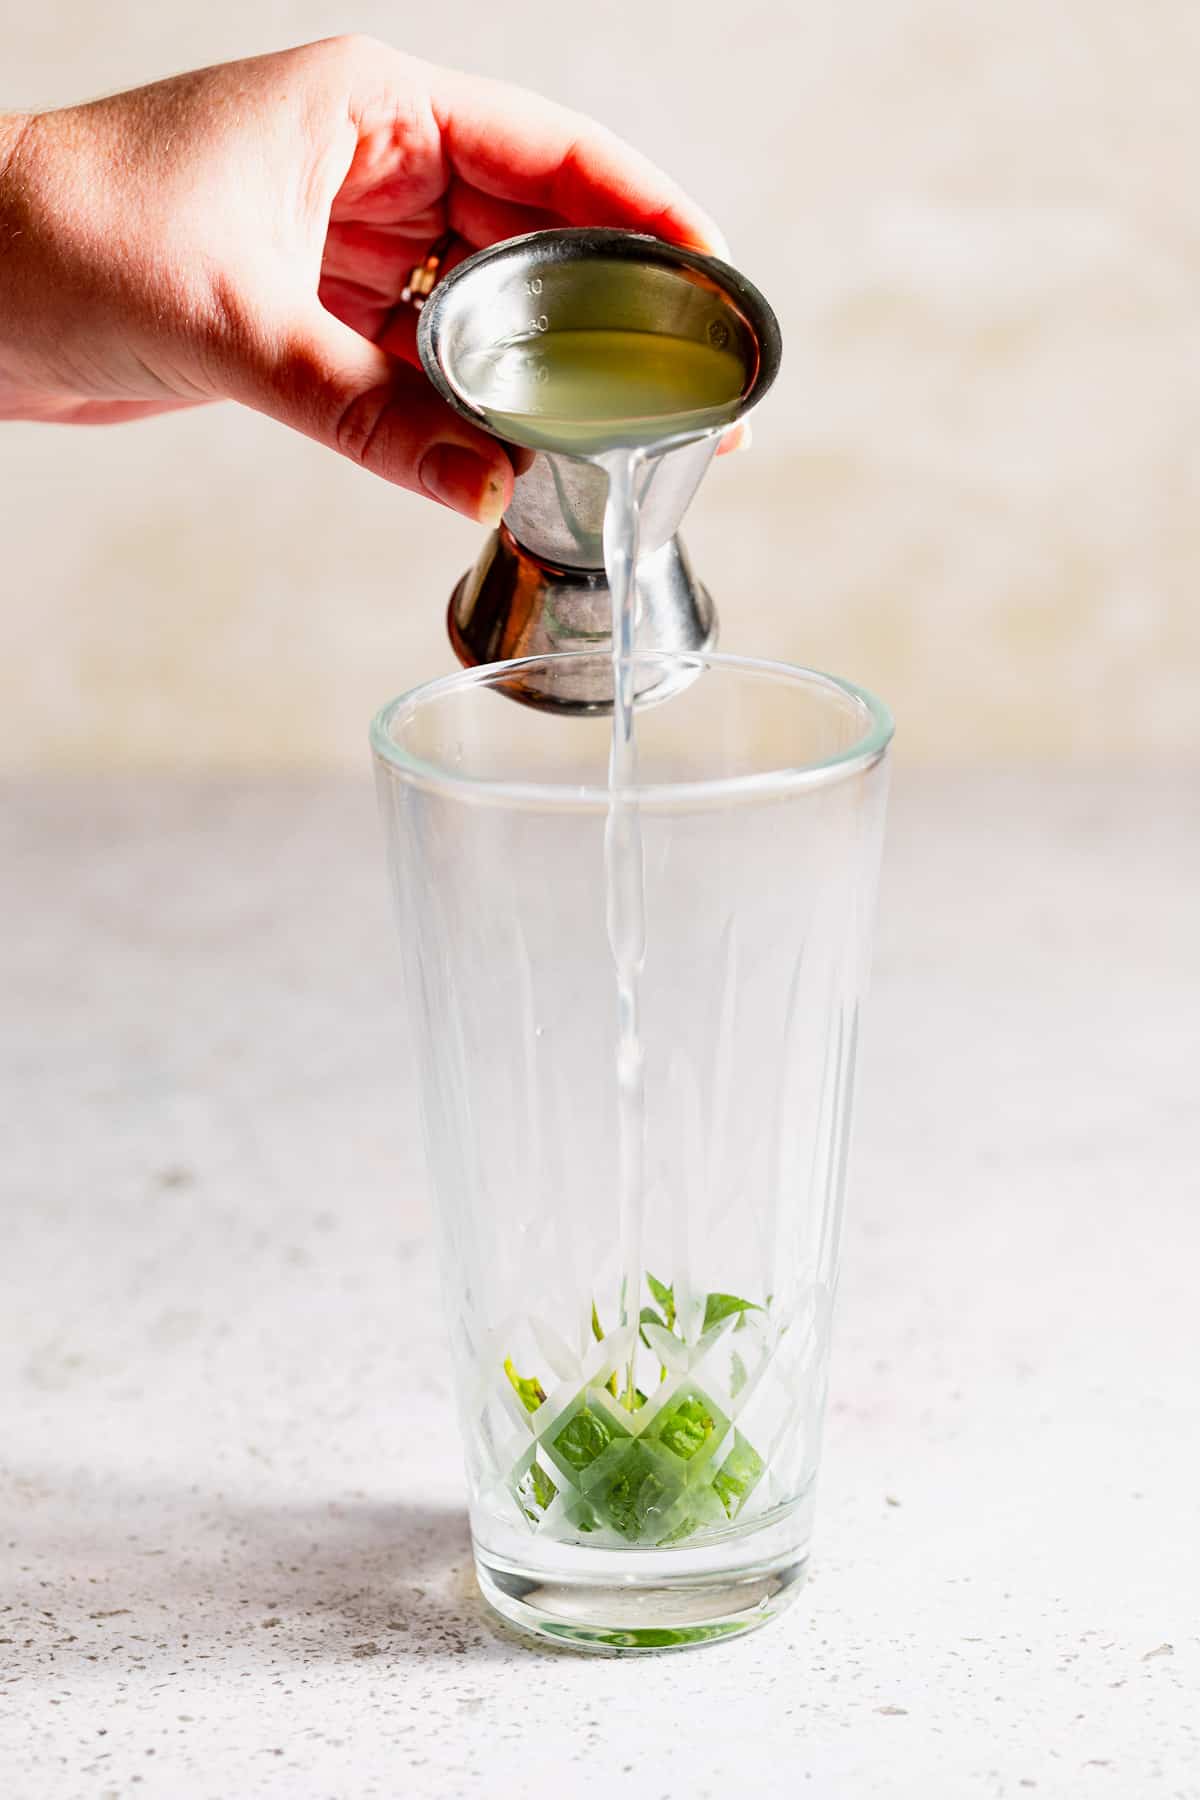 Lime juice pouring into a glass drink shaker